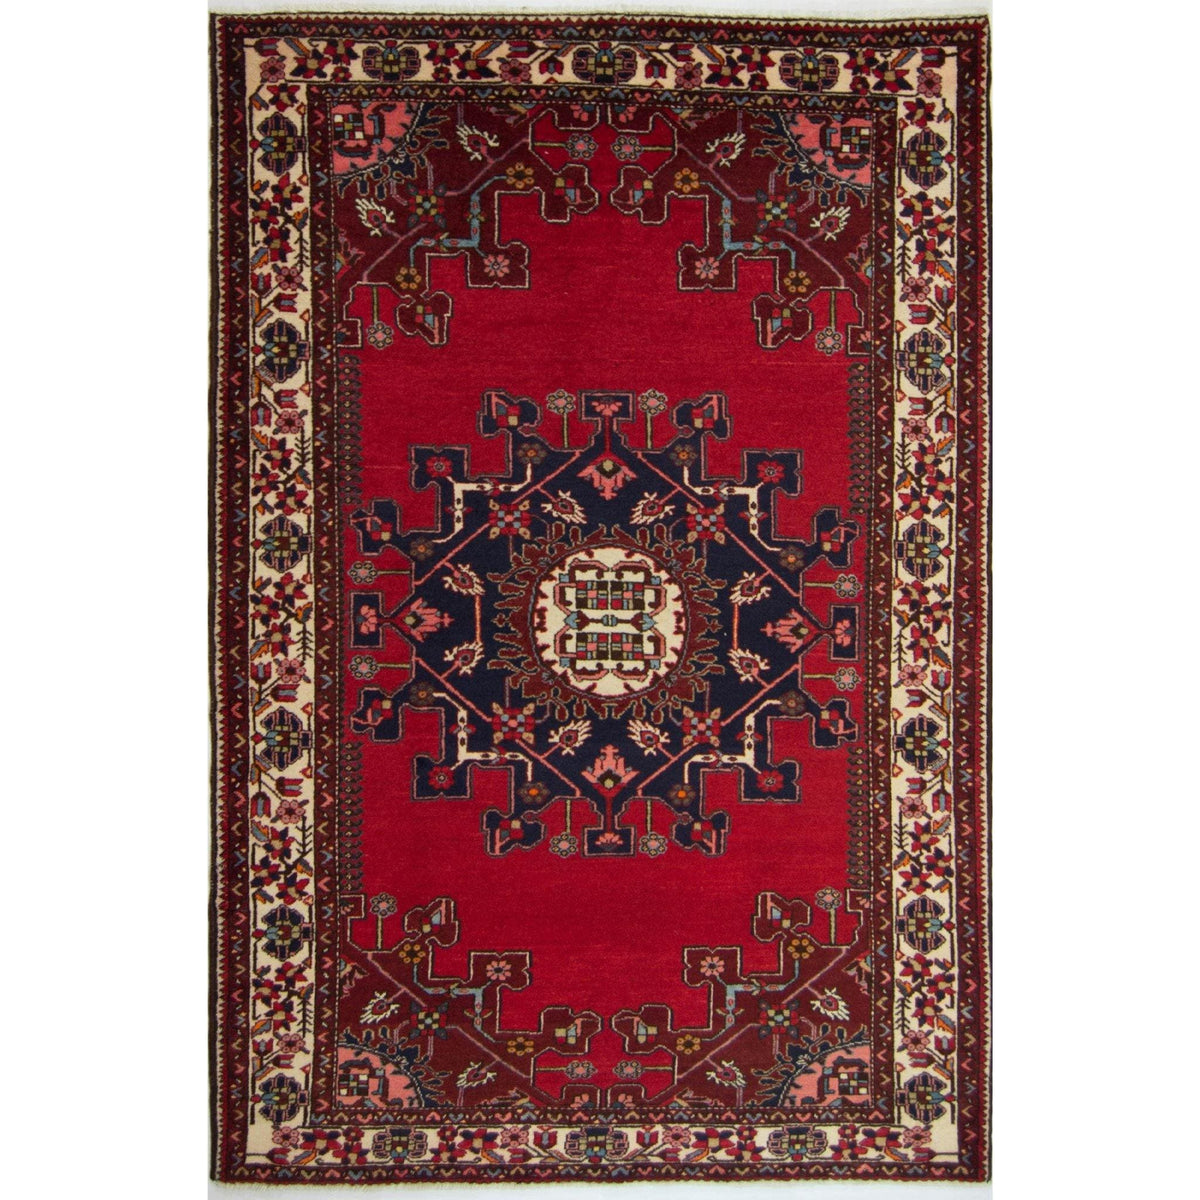 Authentic Hand-knotted Wool Persian Tafresh Rug 140cm x 207cm